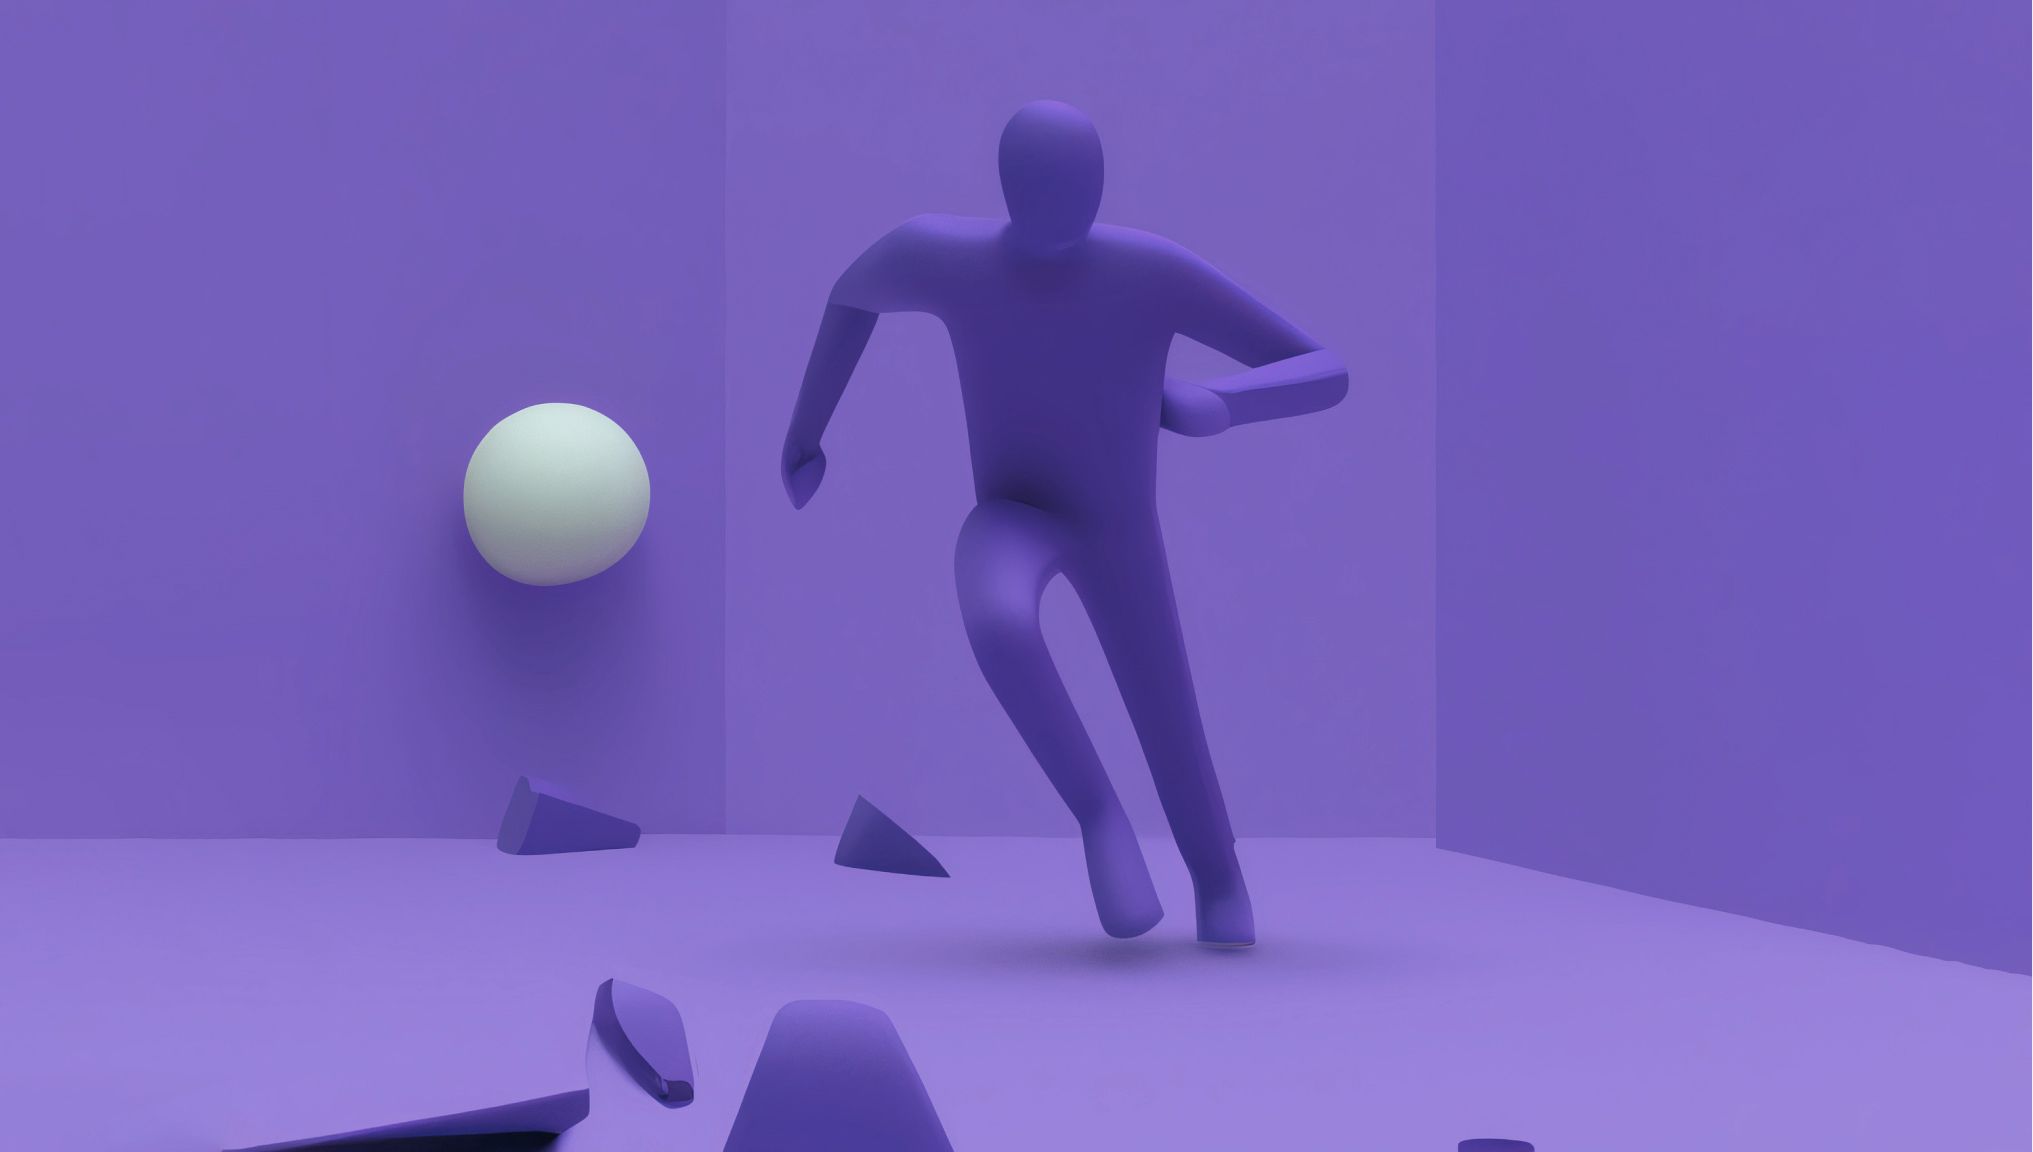 Purple abstract man running towards a white ball in a fully purple room with purple shards in front of him